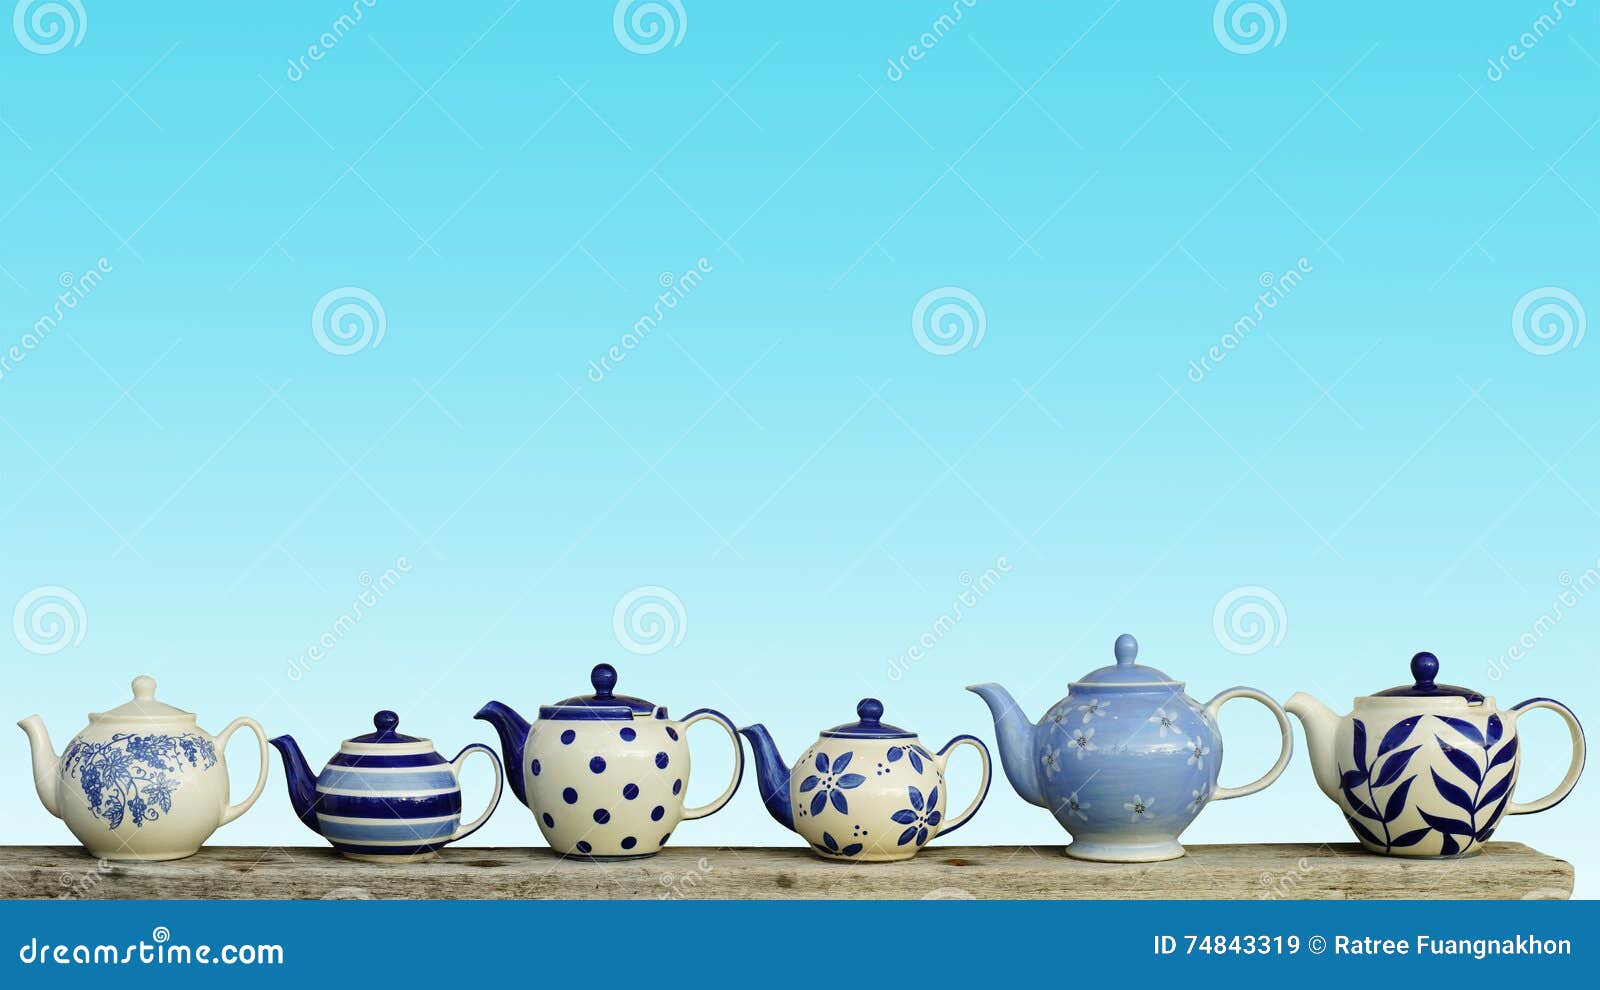 ceramic teapot with blue pastel wall background.